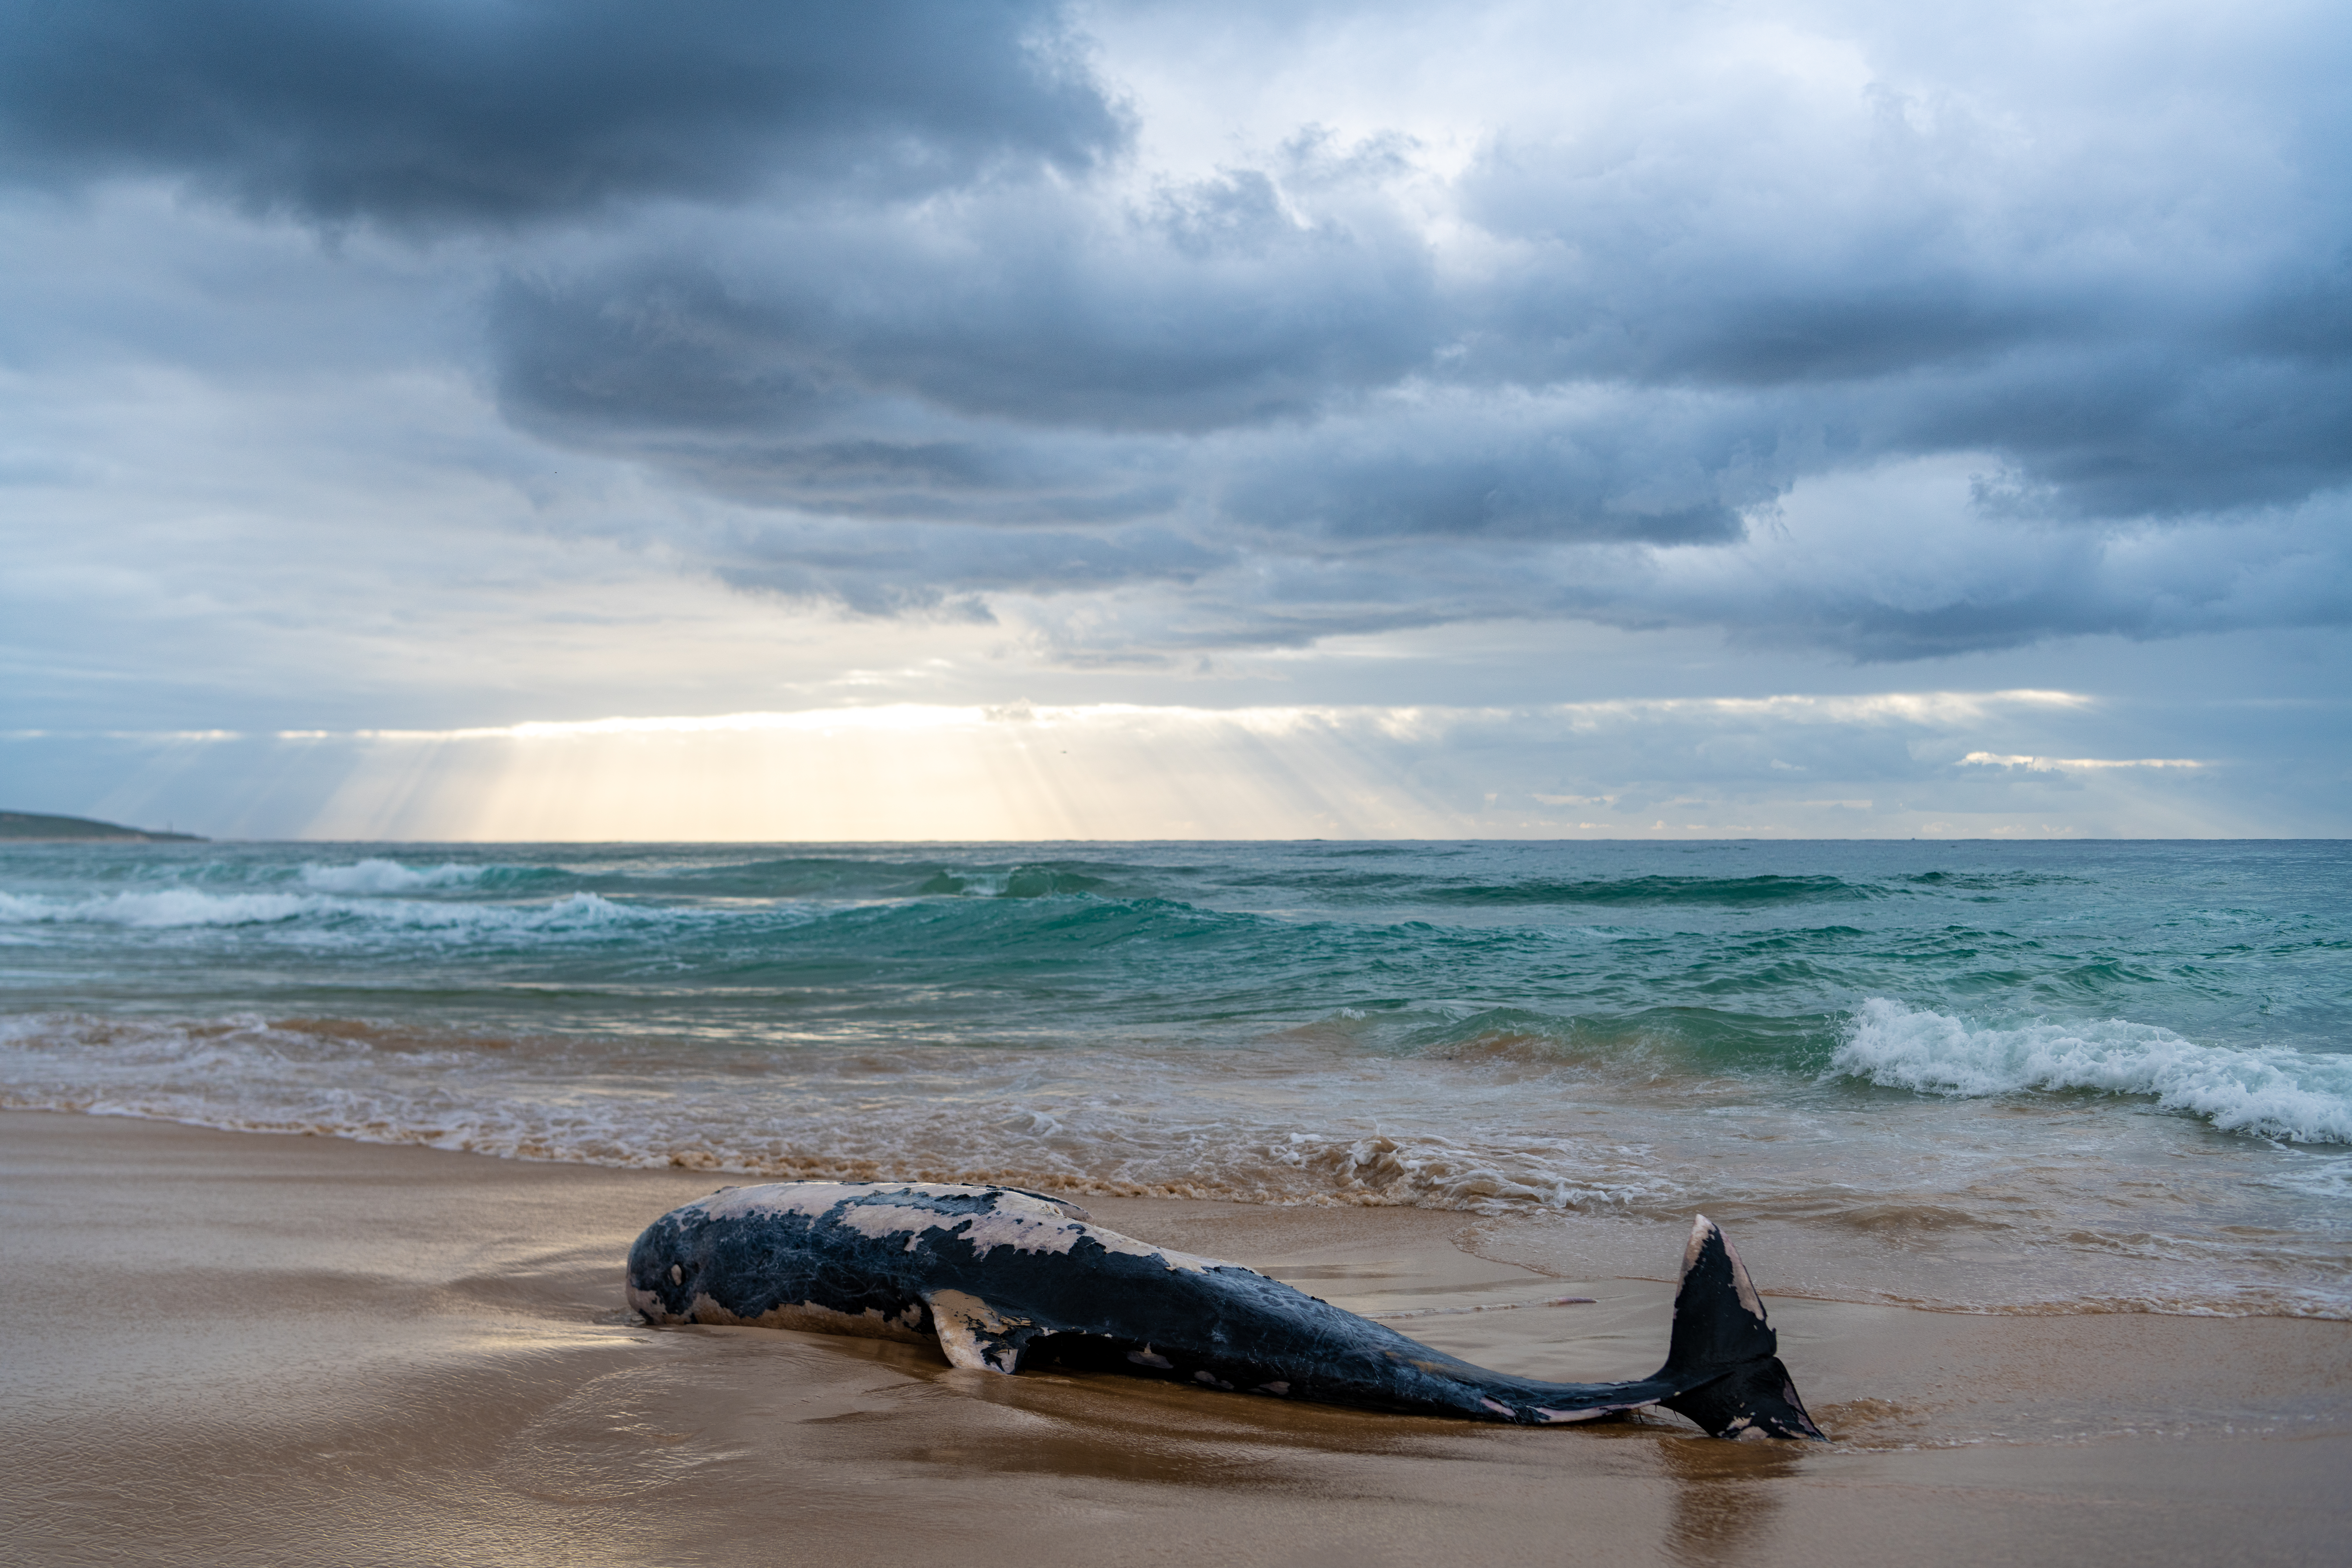 A dolphin carcass was found at a beach in Cronulla with a massive shark bite.